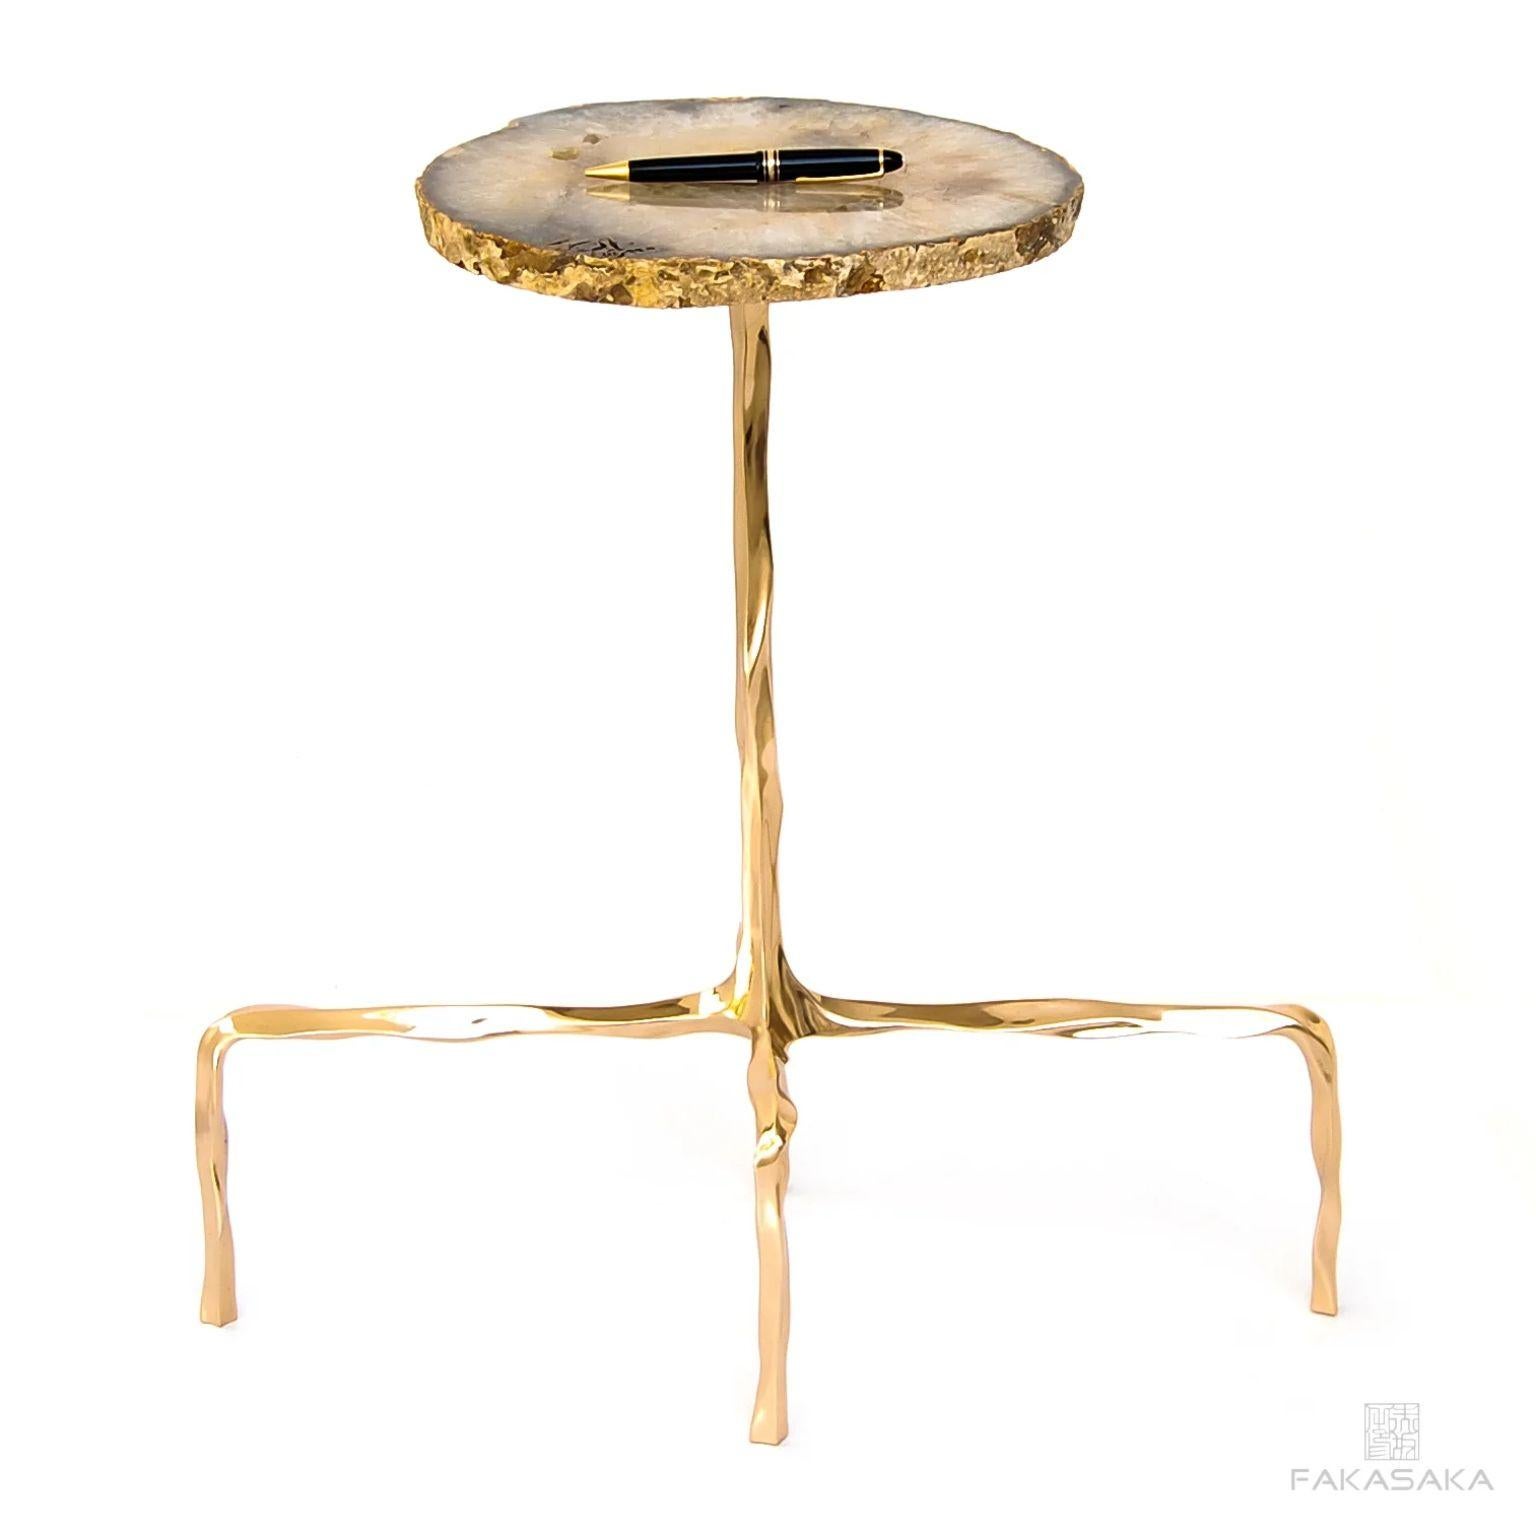 Modern Presley Drink Table with Agate Top by Fakasaka Design For Sale